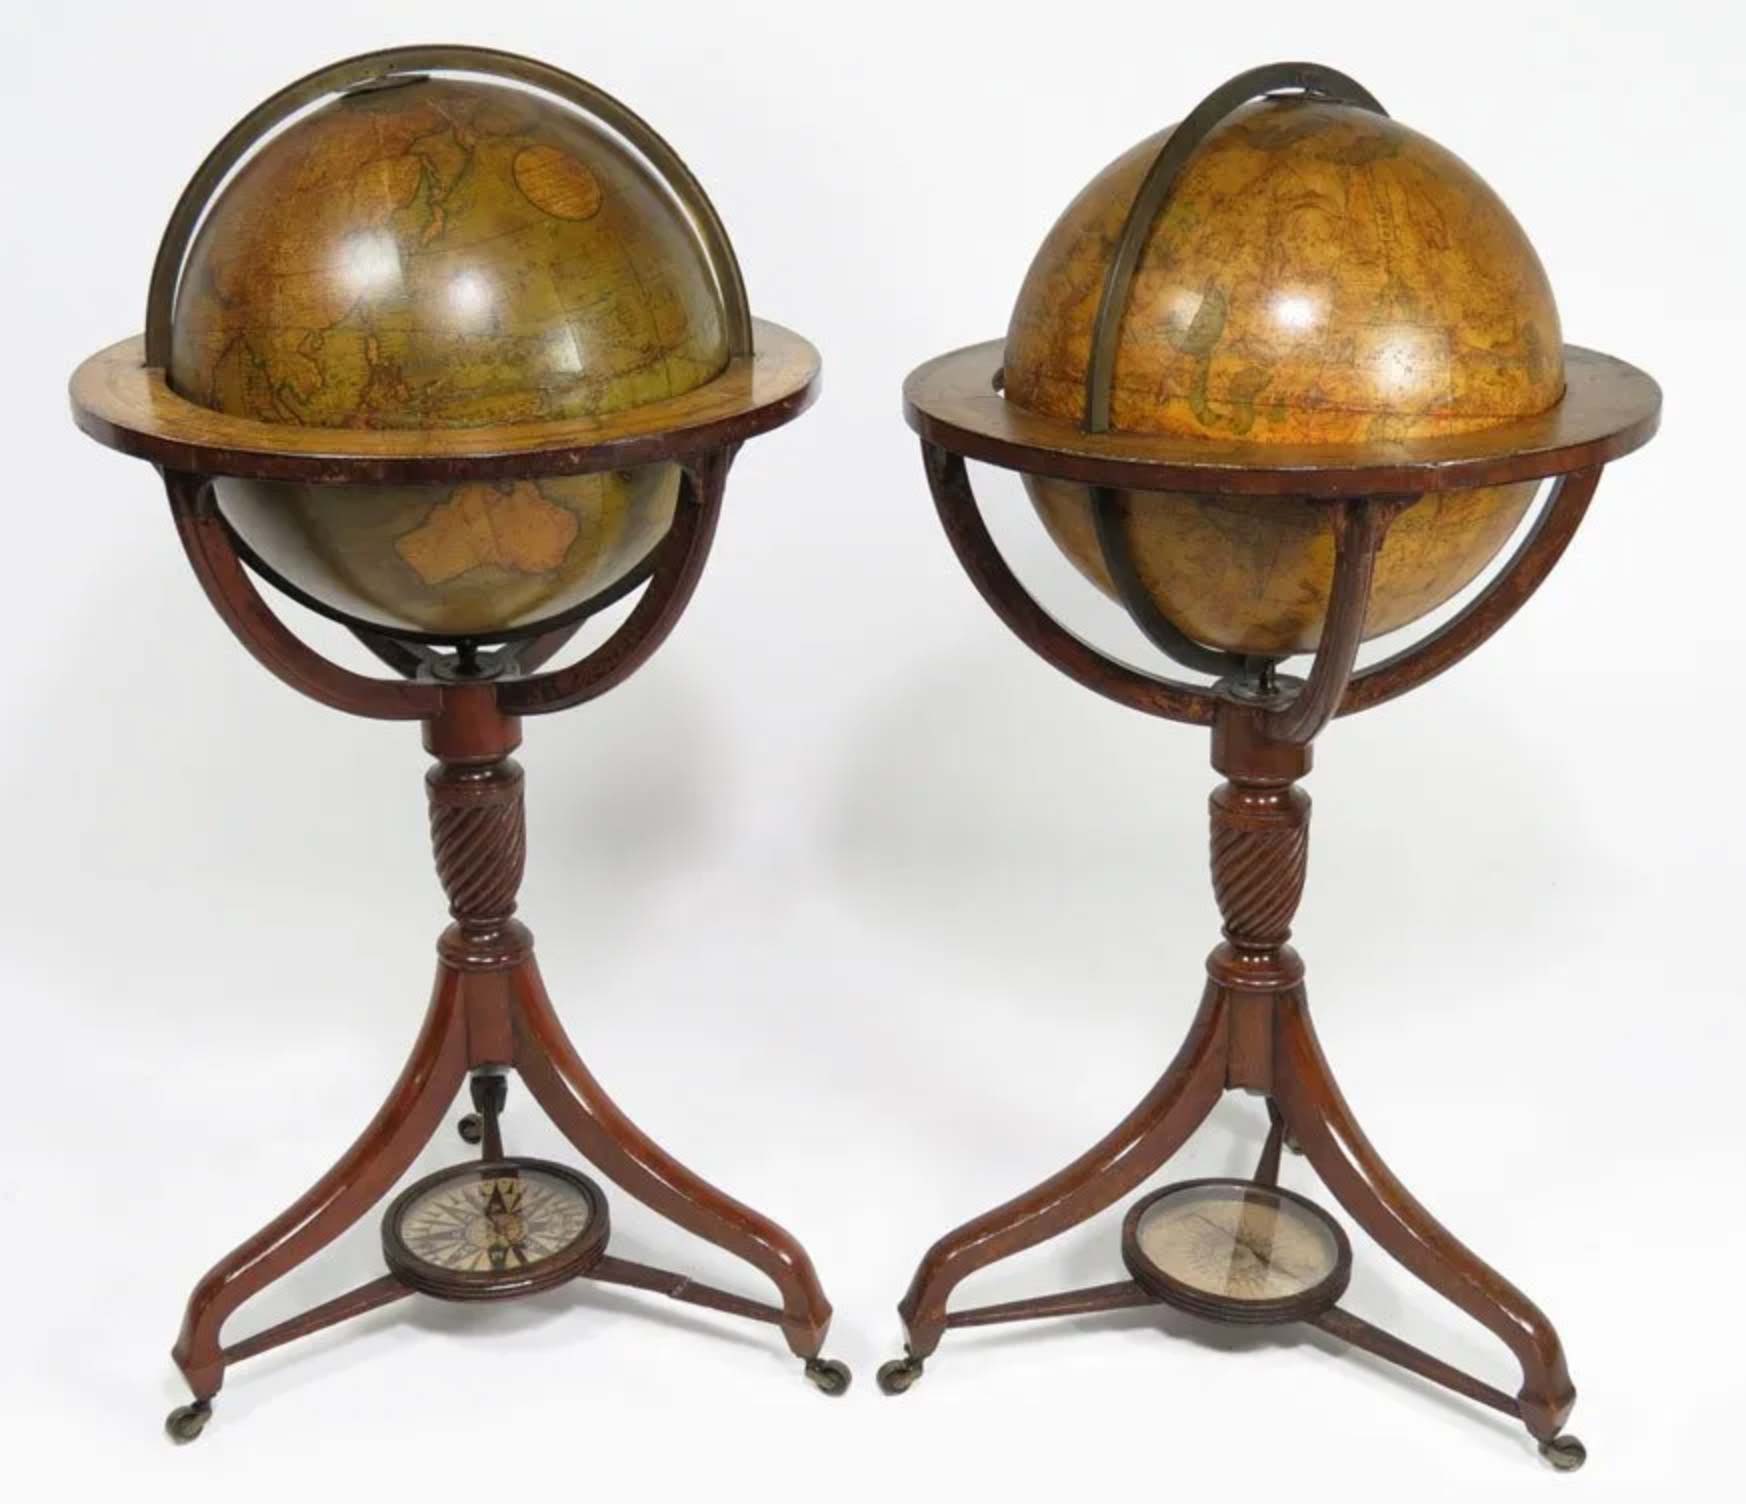 Pair of English Regency floor globes, J&W Cary, London, 1817, sold for $37,000. Image courtesy CRN Auctions